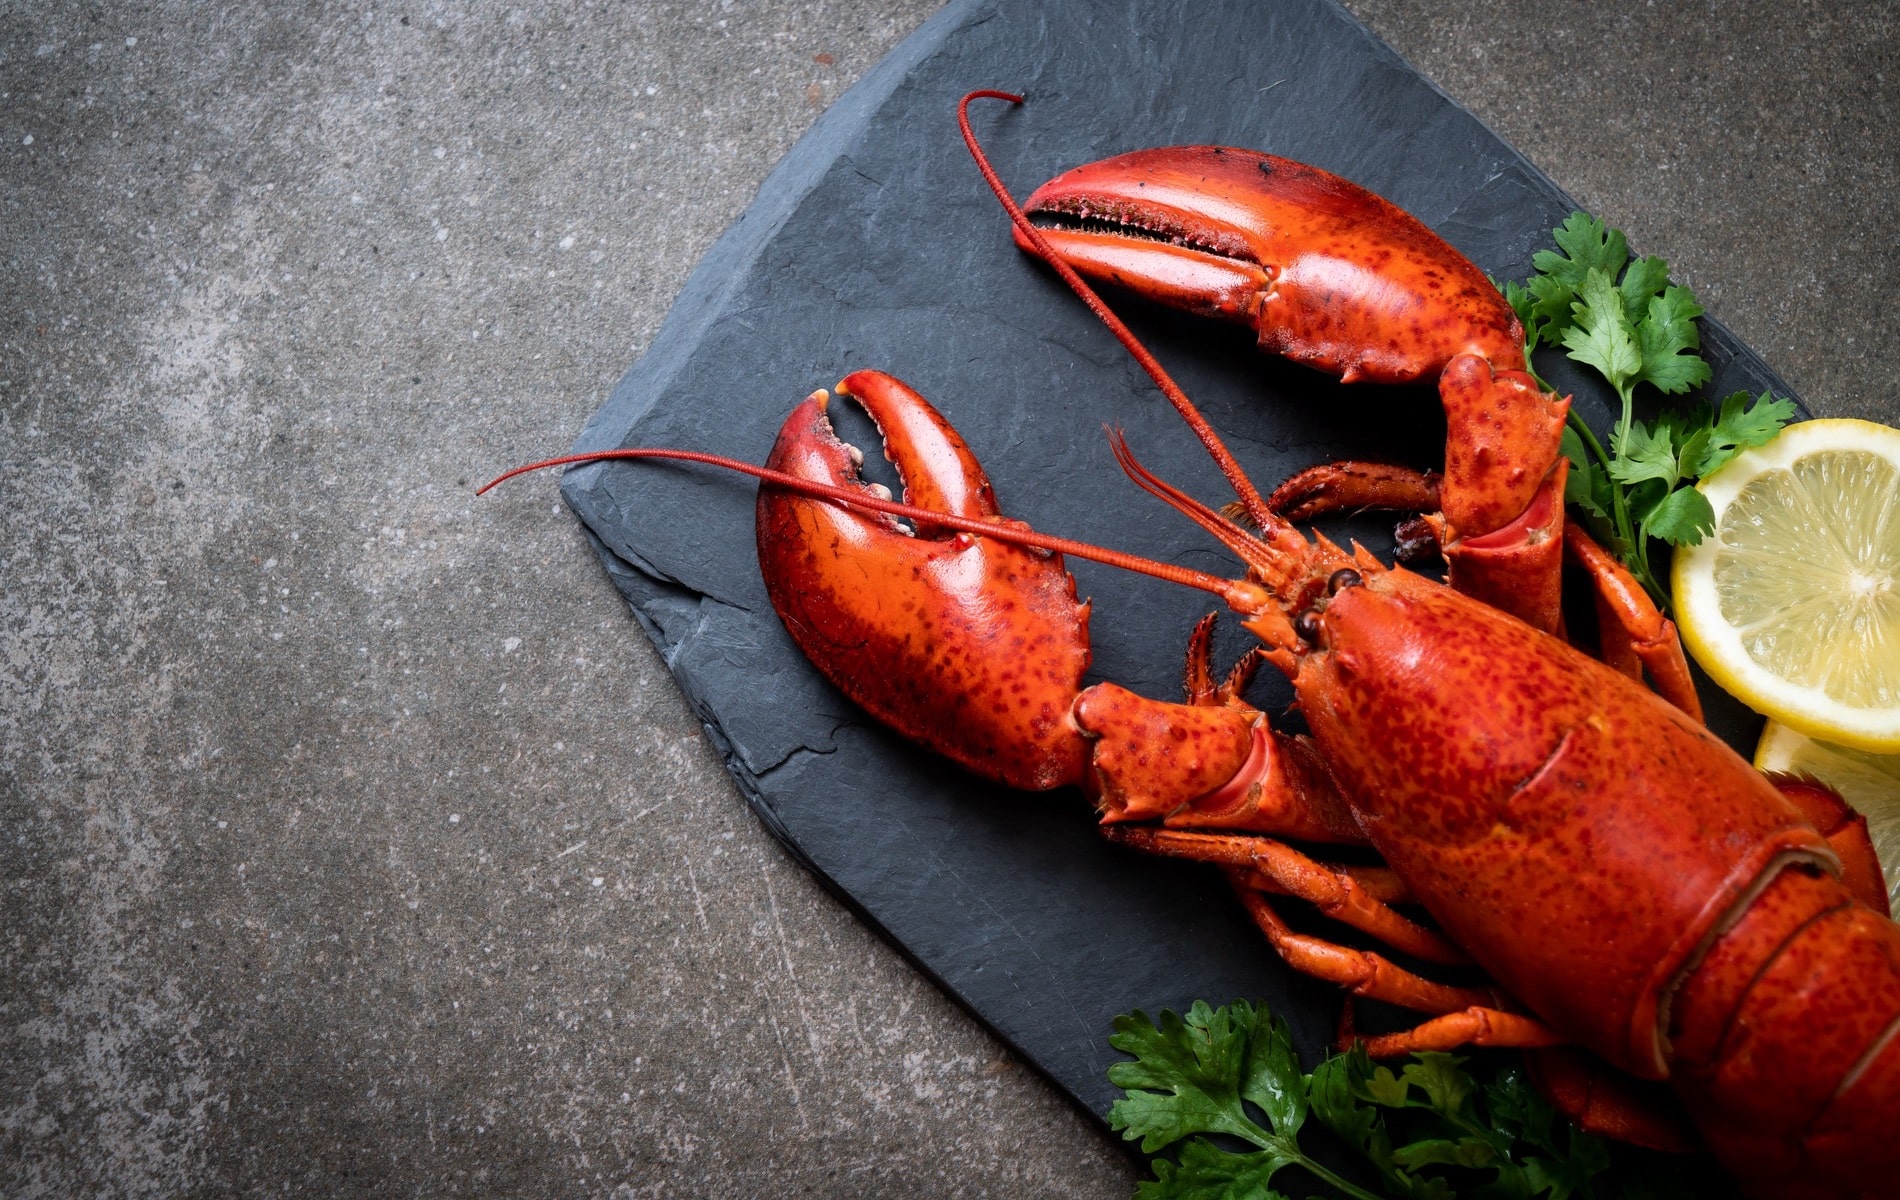 Schooners Hosts 30th Annual Lobster Festival & Tournament this October